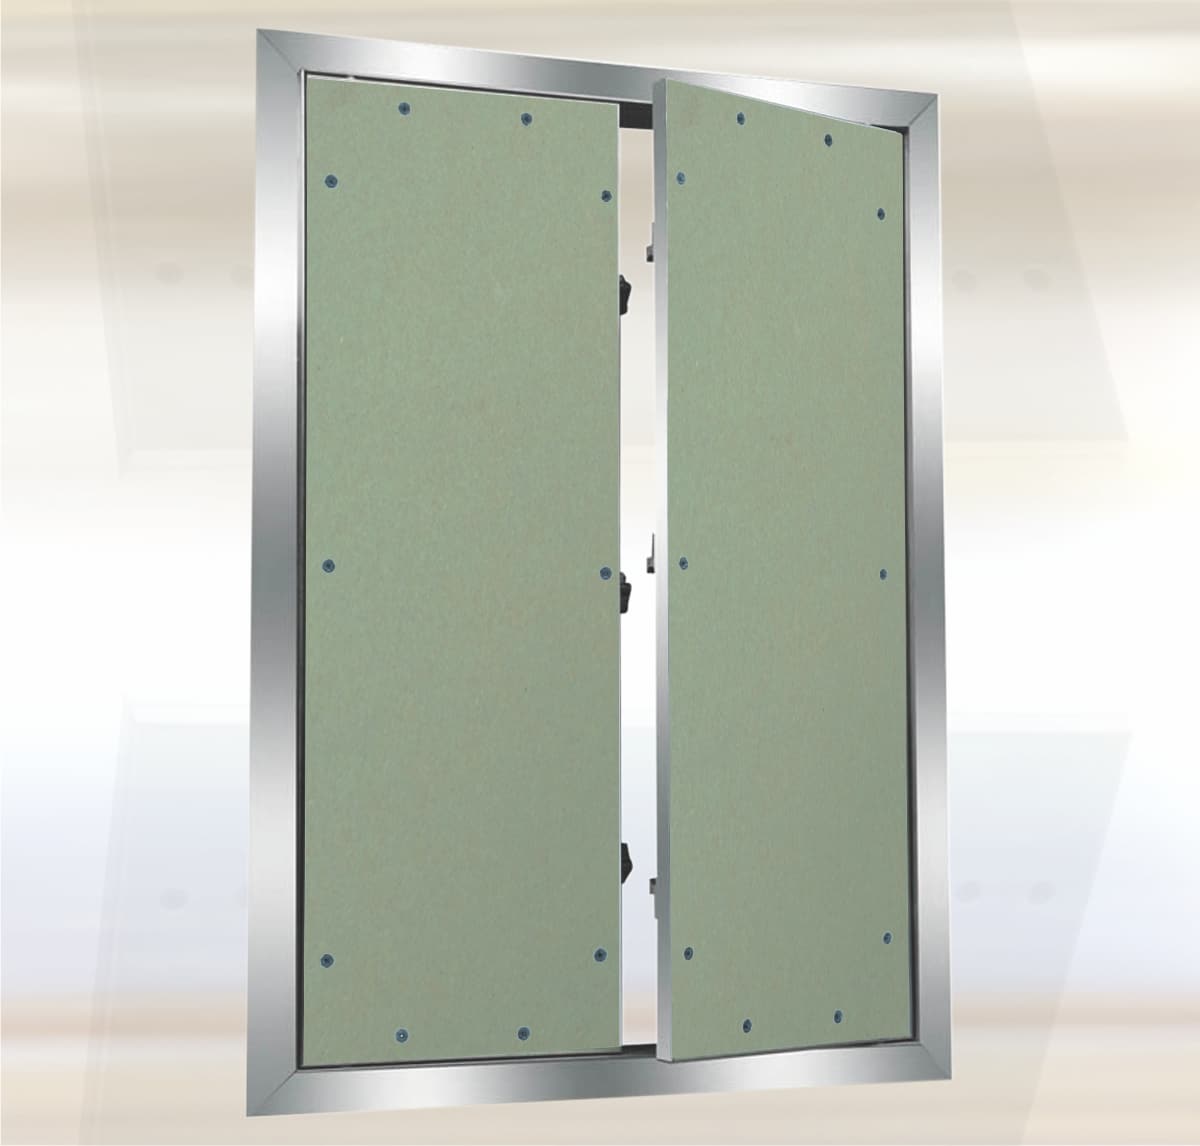 System F1 - Multi-Door Fixed Hinge Access Panel with Drywall Inlay